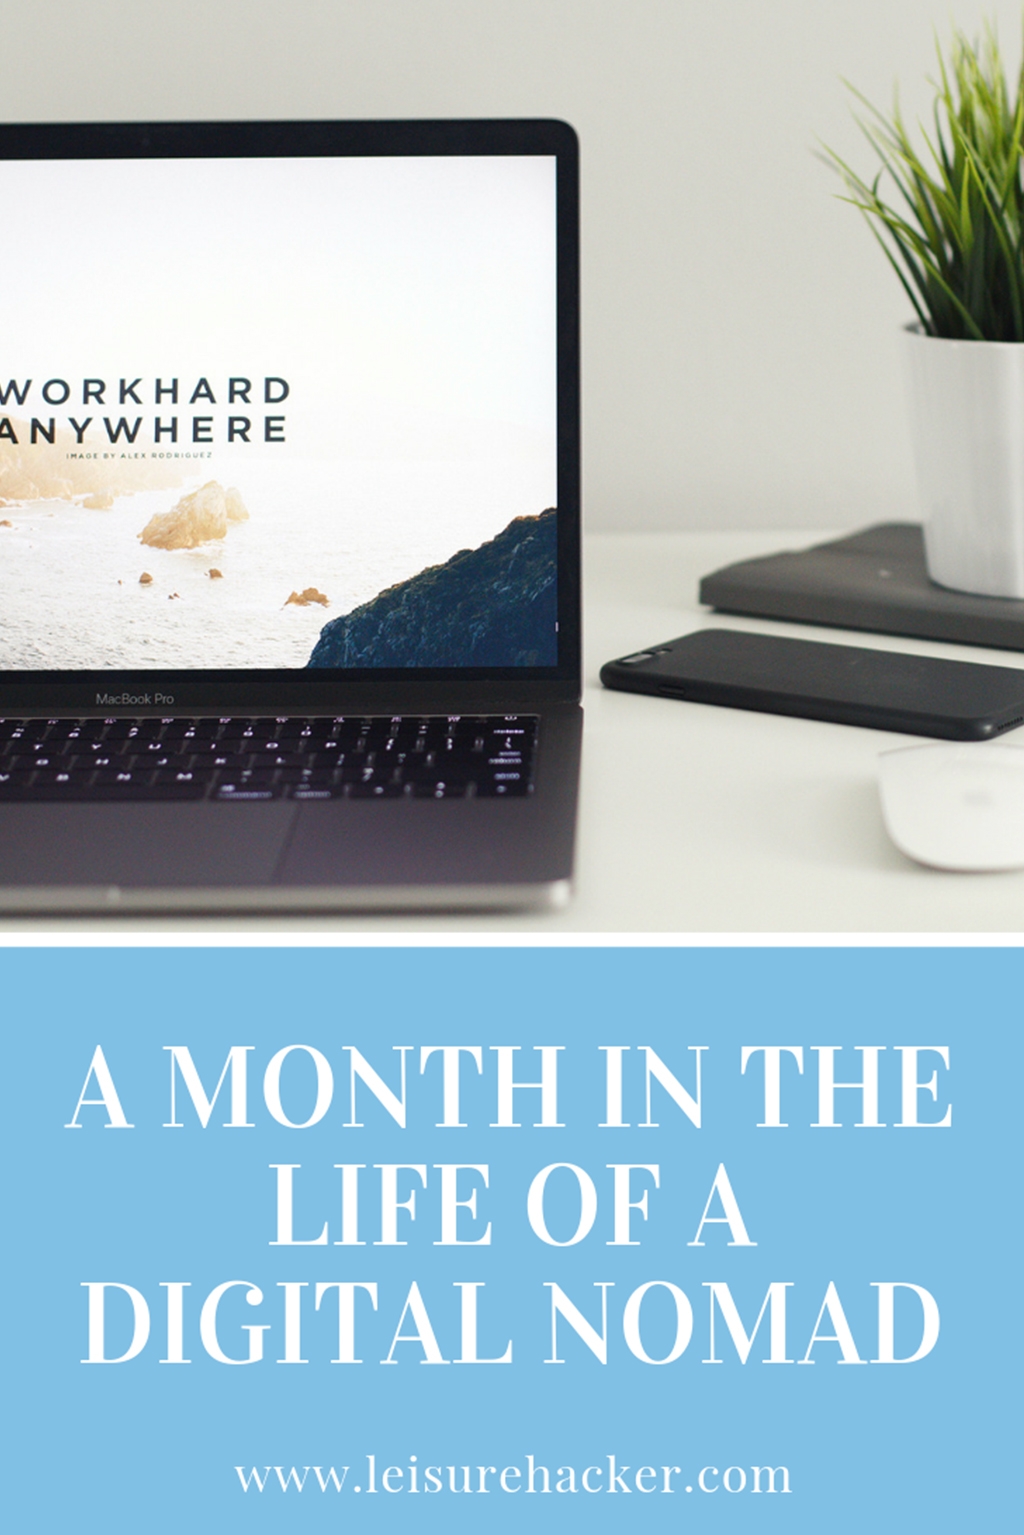 A month in the life of a digital nomad